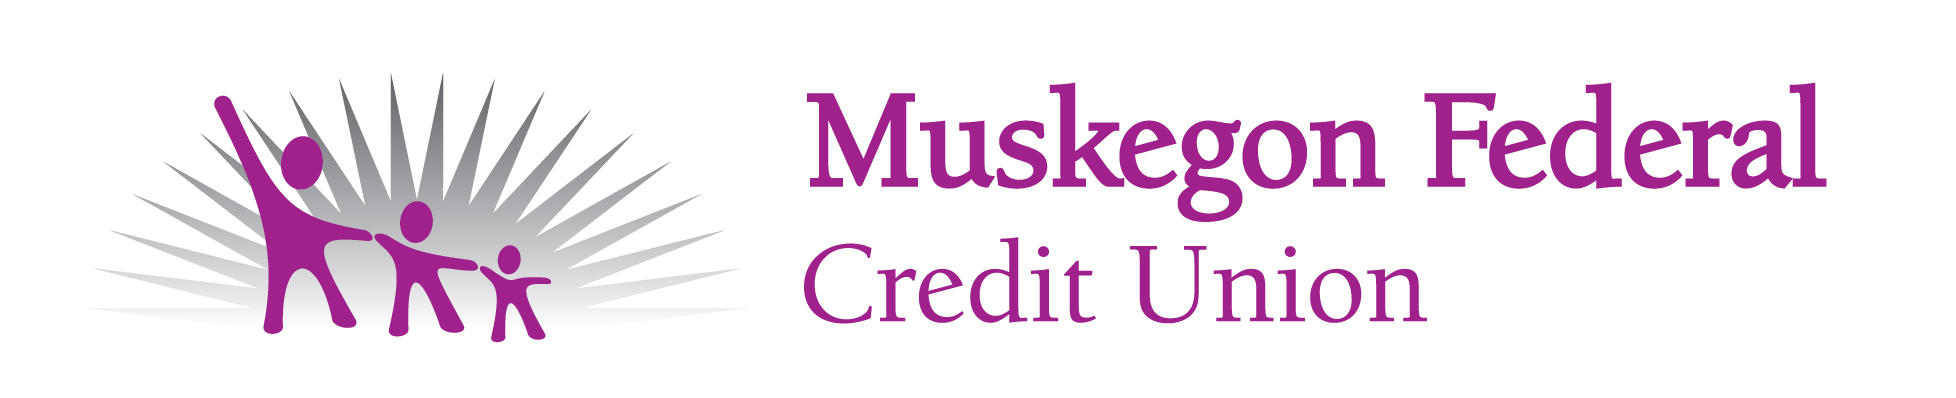 Muskegon Federal Credit Union - Holton Road